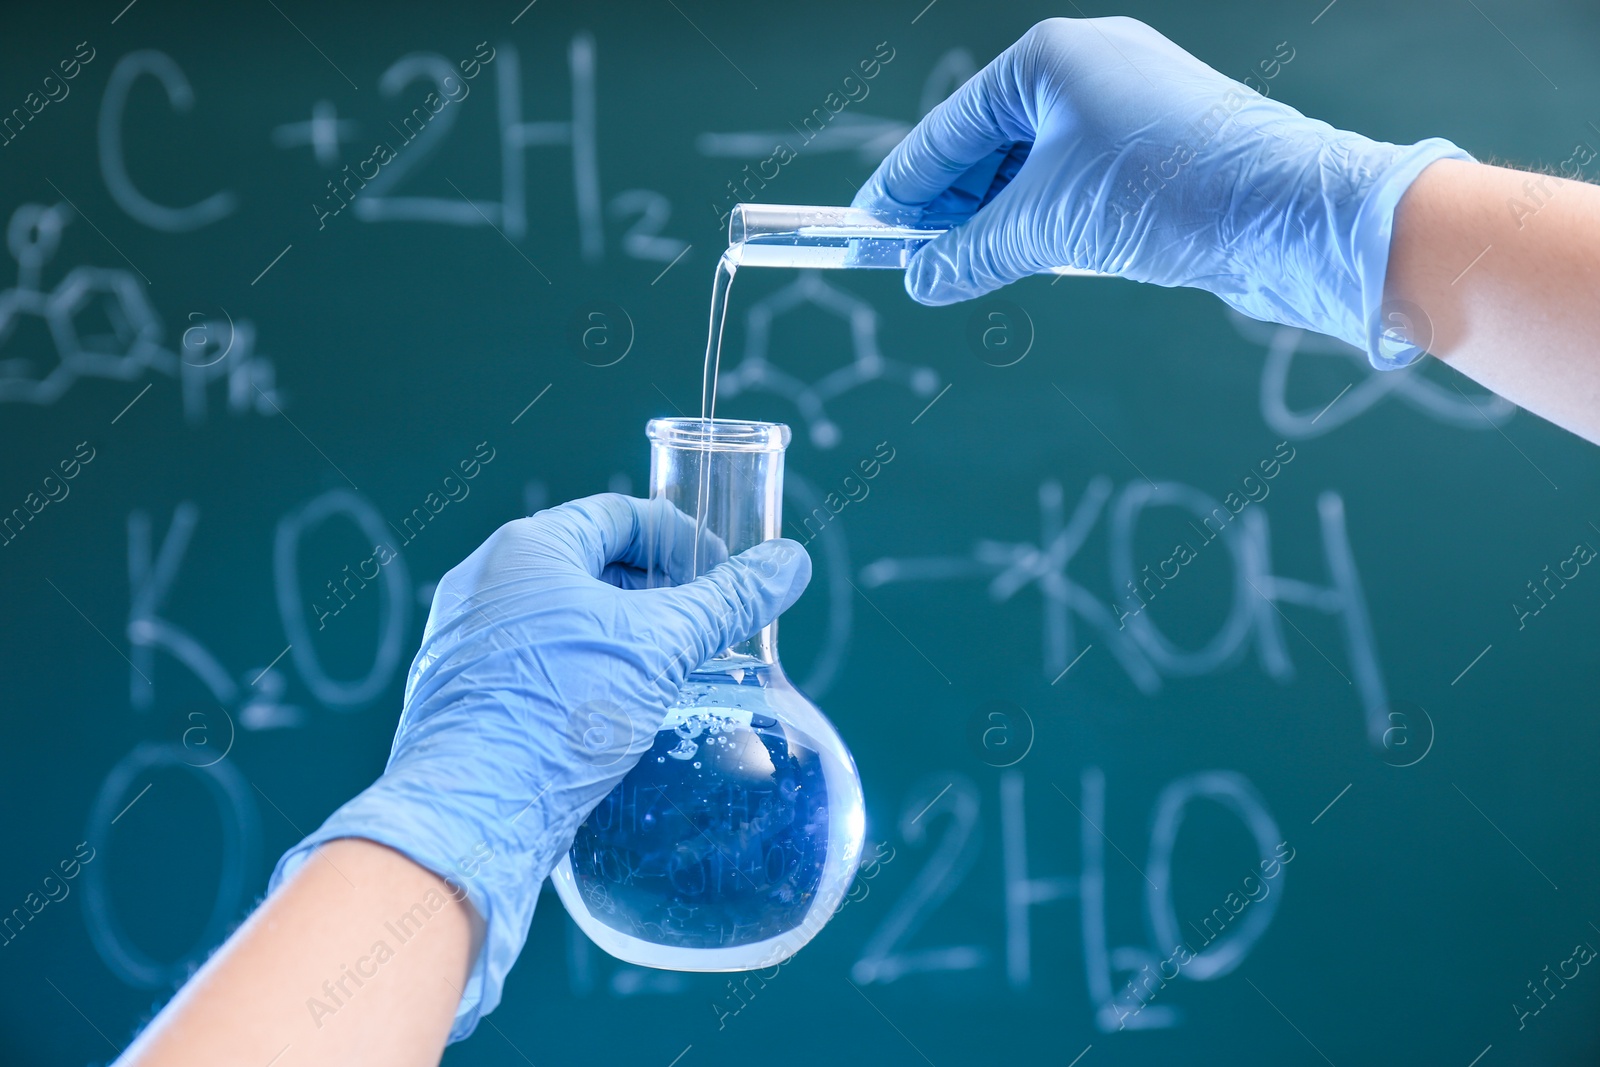 Photo of Scientist pouring liquid into flask against chalkboard, closeup. Chemistry glassware